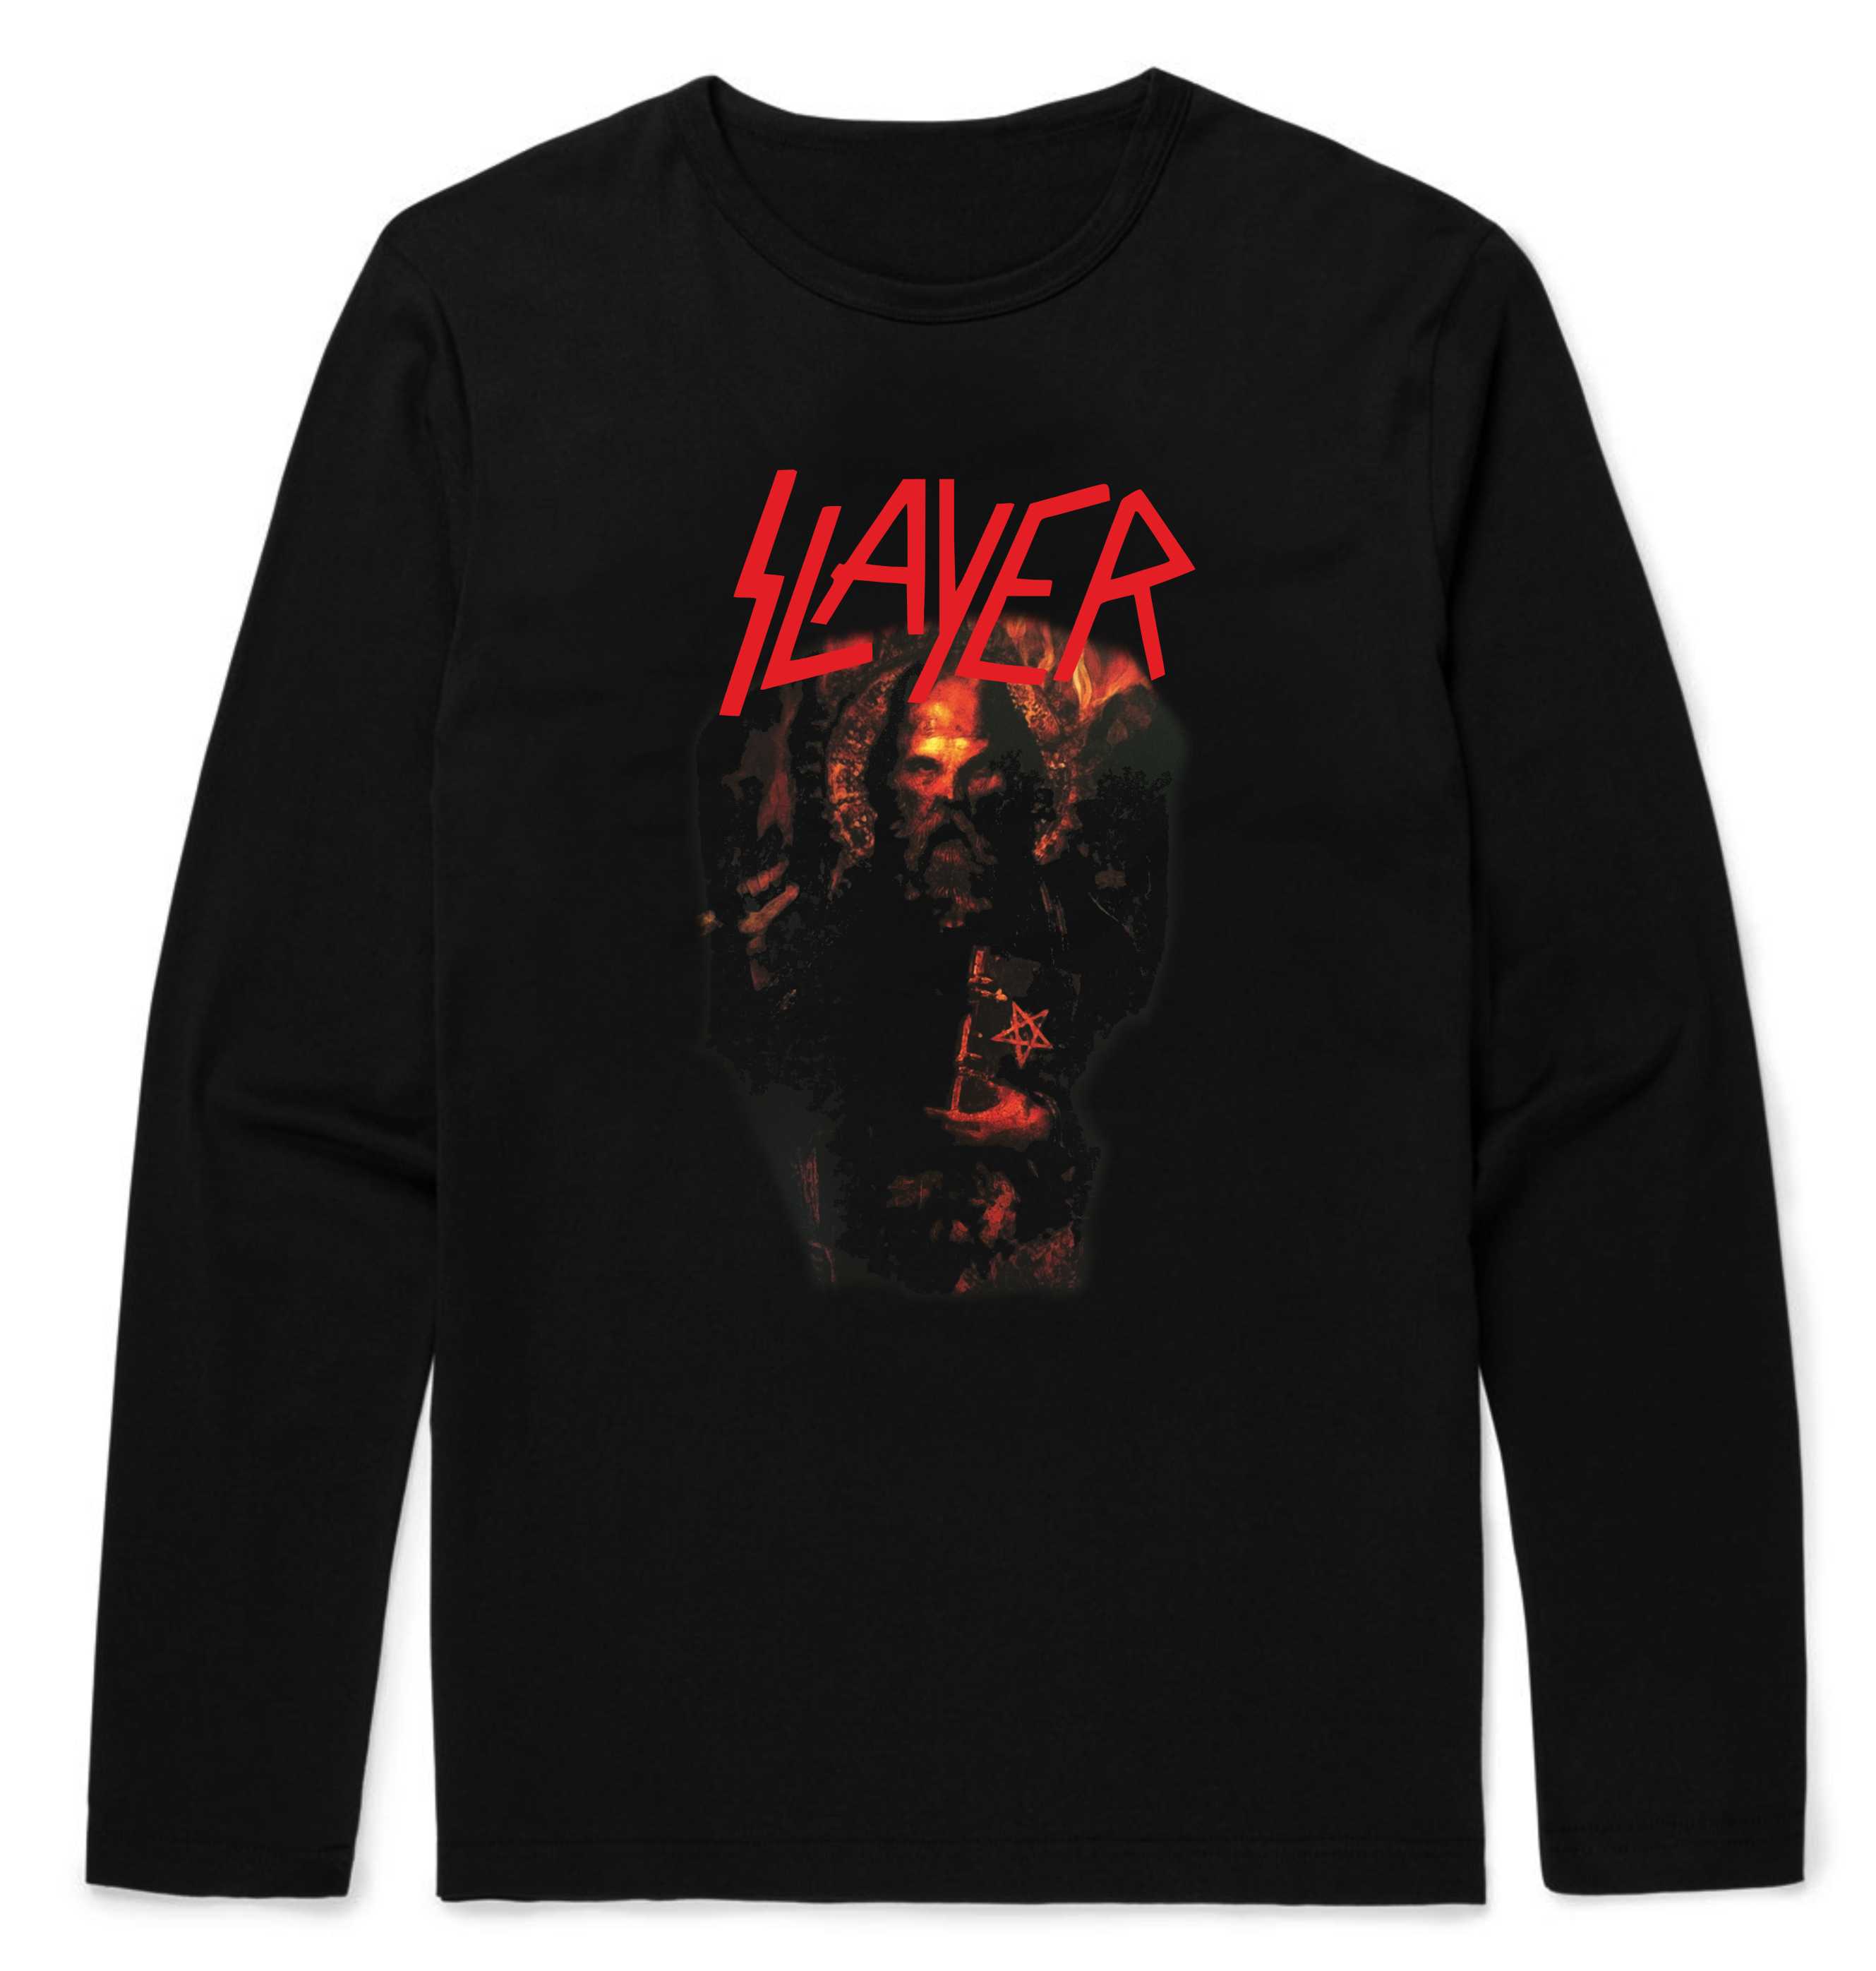 Slayer Priest Longsleeve T-Shirt – Metal & Rock T-shirts and Accessories